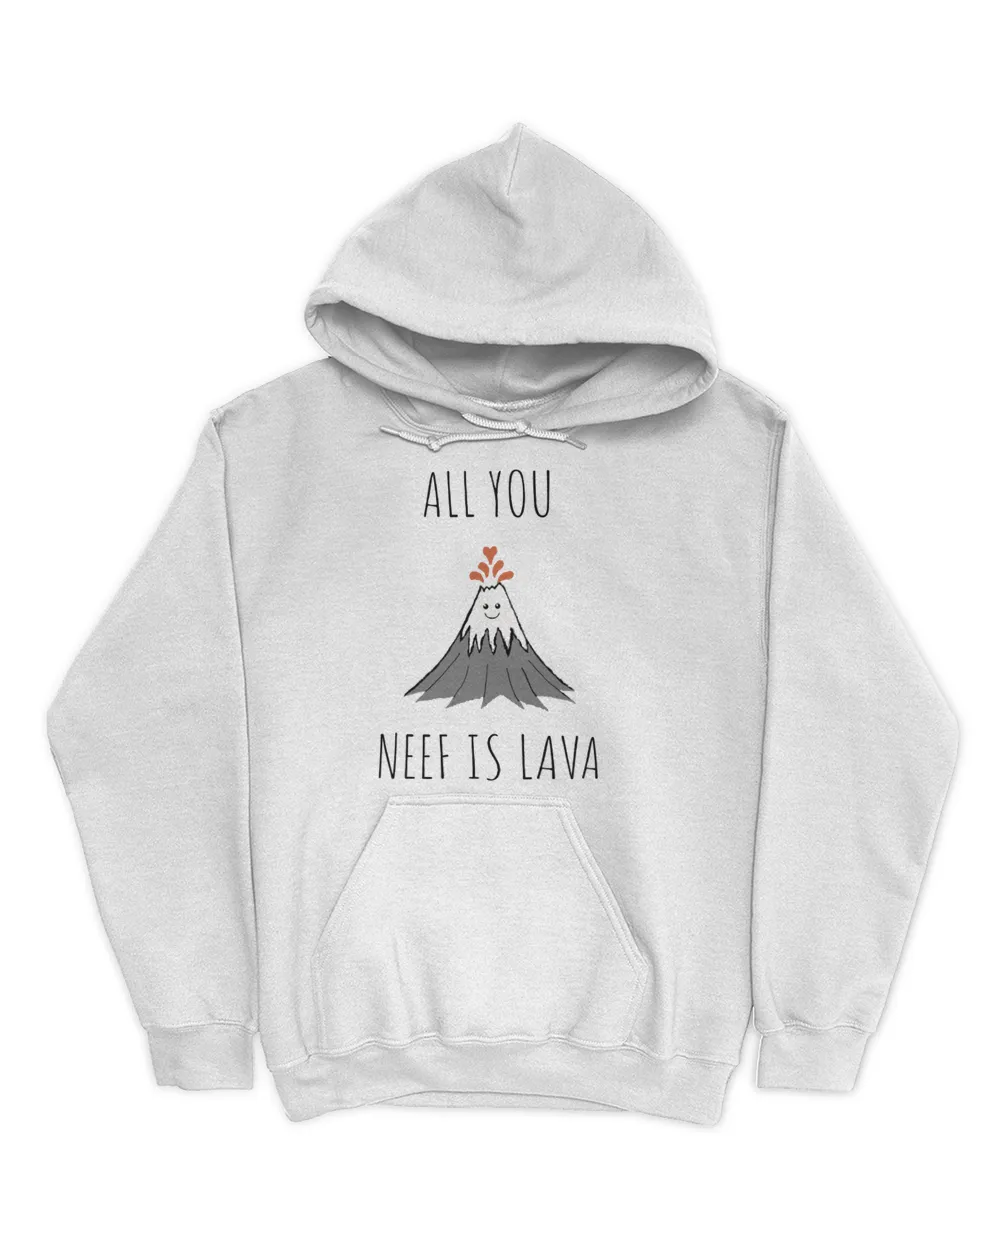 All You Need Is Lava shirt